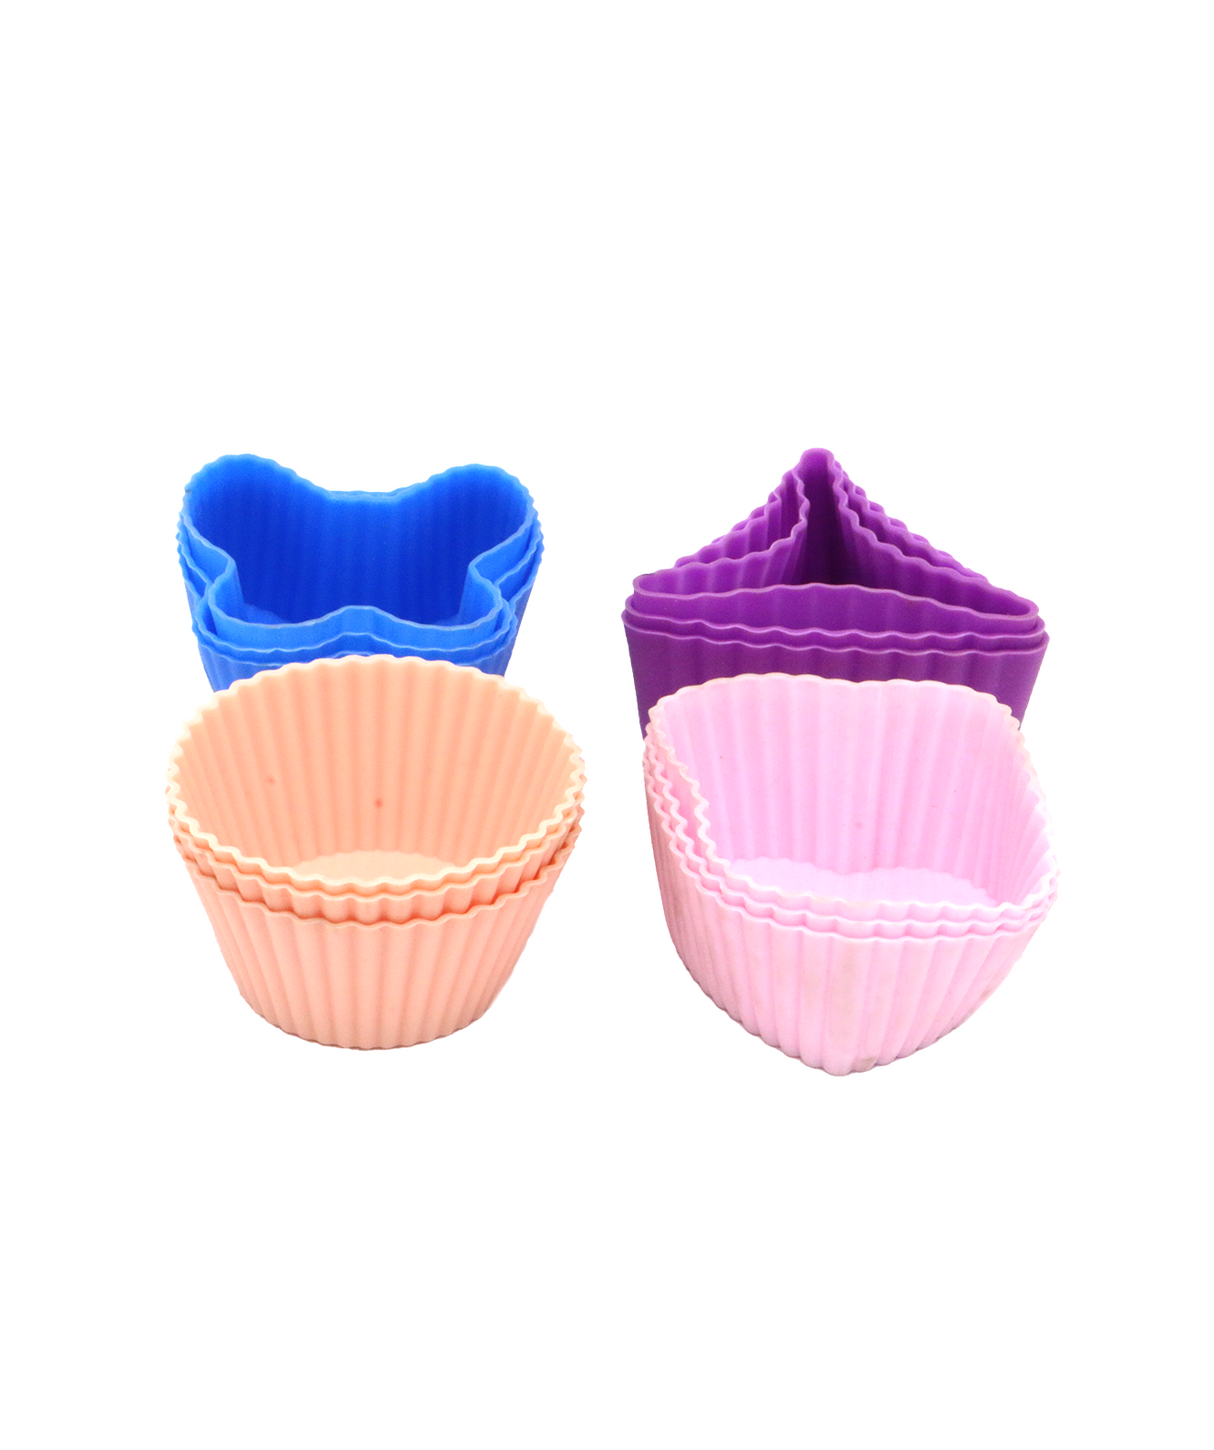 cup cake 12pc silicon